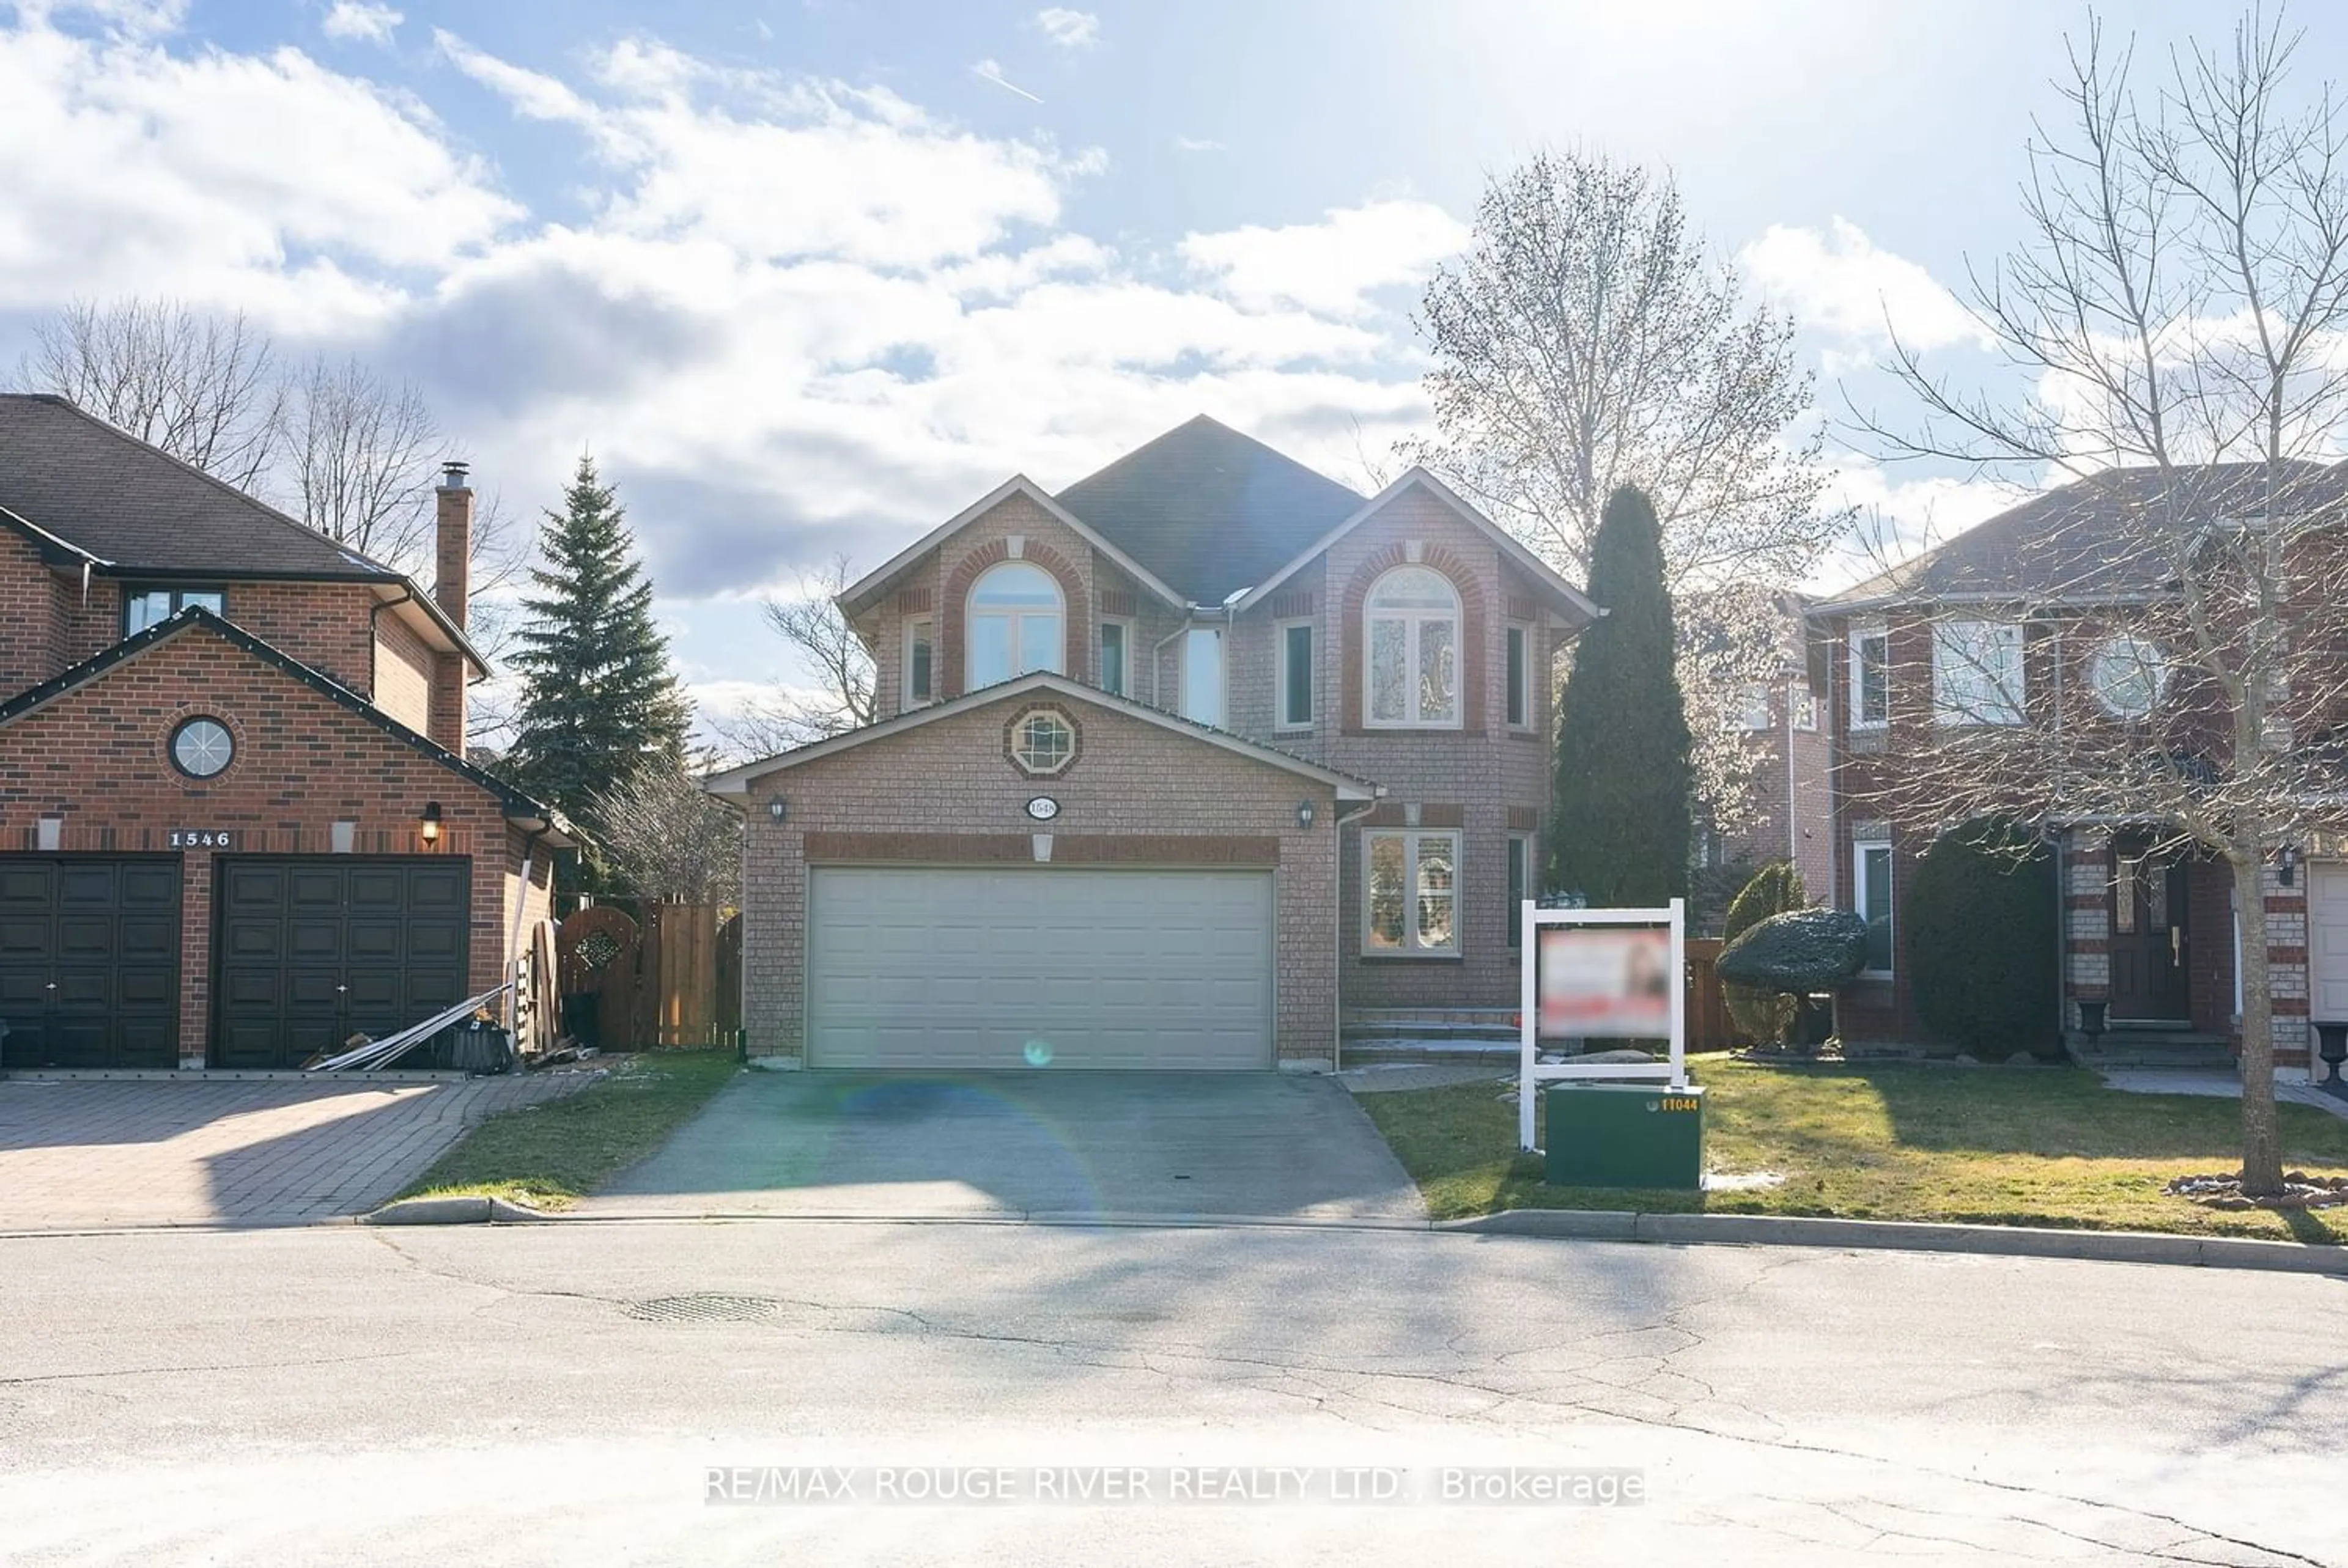 Home with brick exterior material for 1548 Meldron Dr, Pickering Ontario L1V 6T2